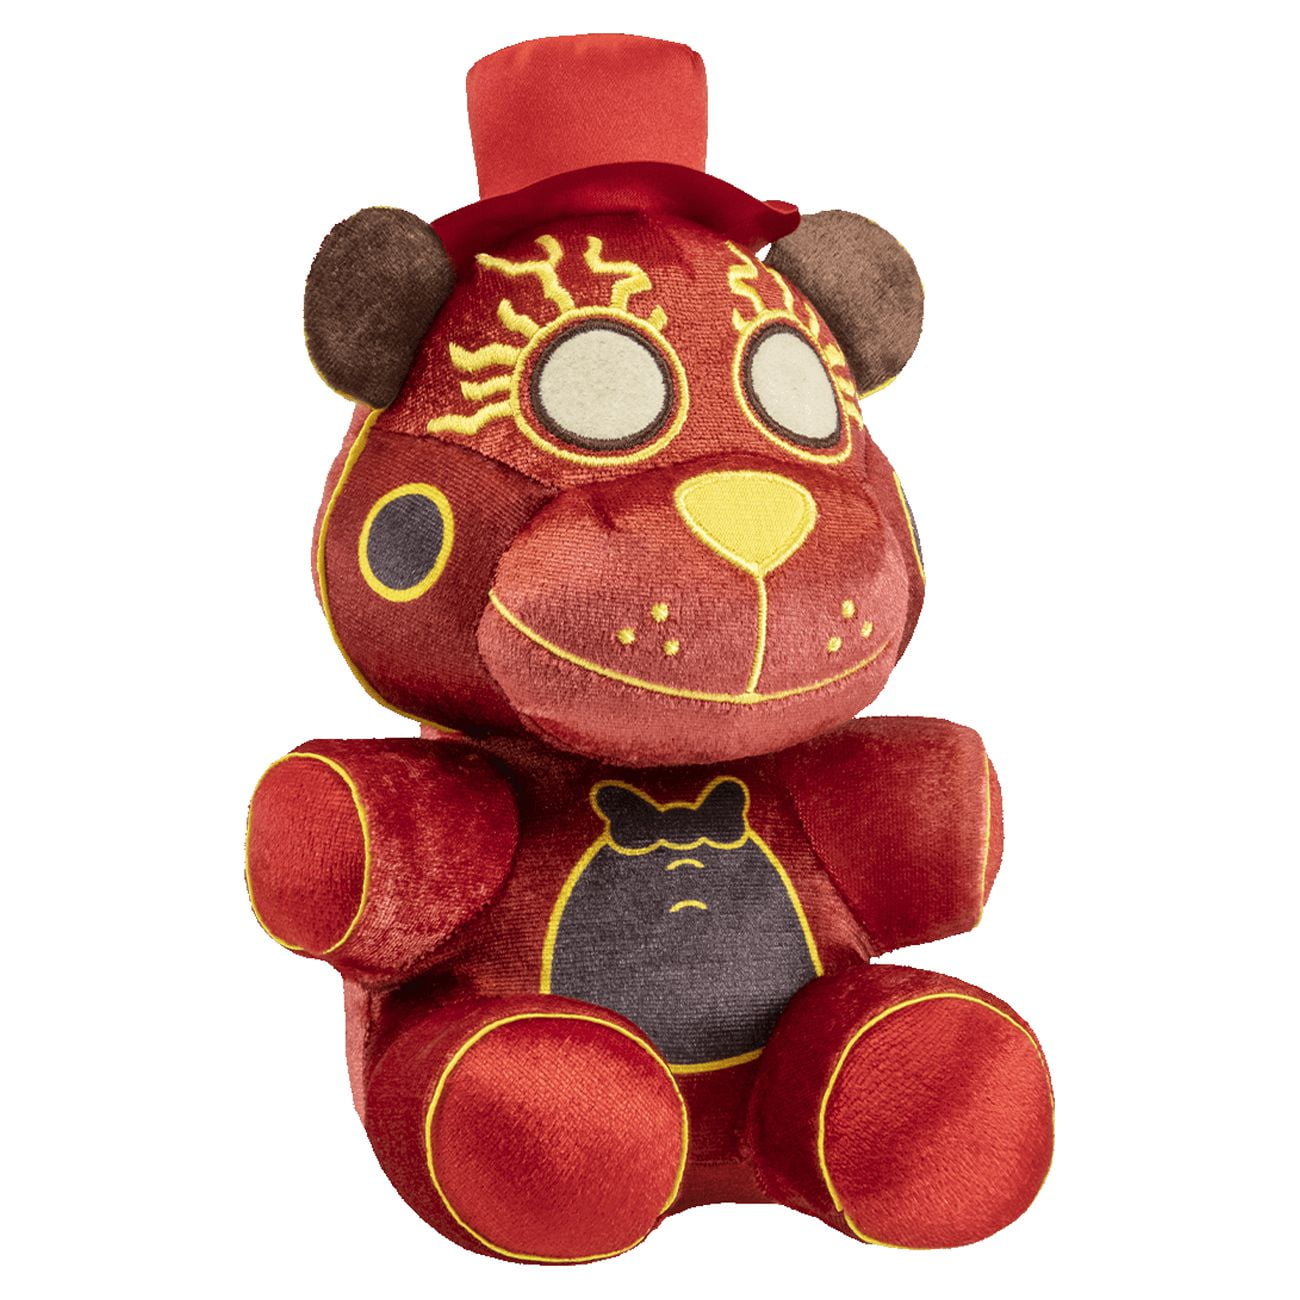 Funko Plush Assortment: Five Nights at Freddy's – Receive One